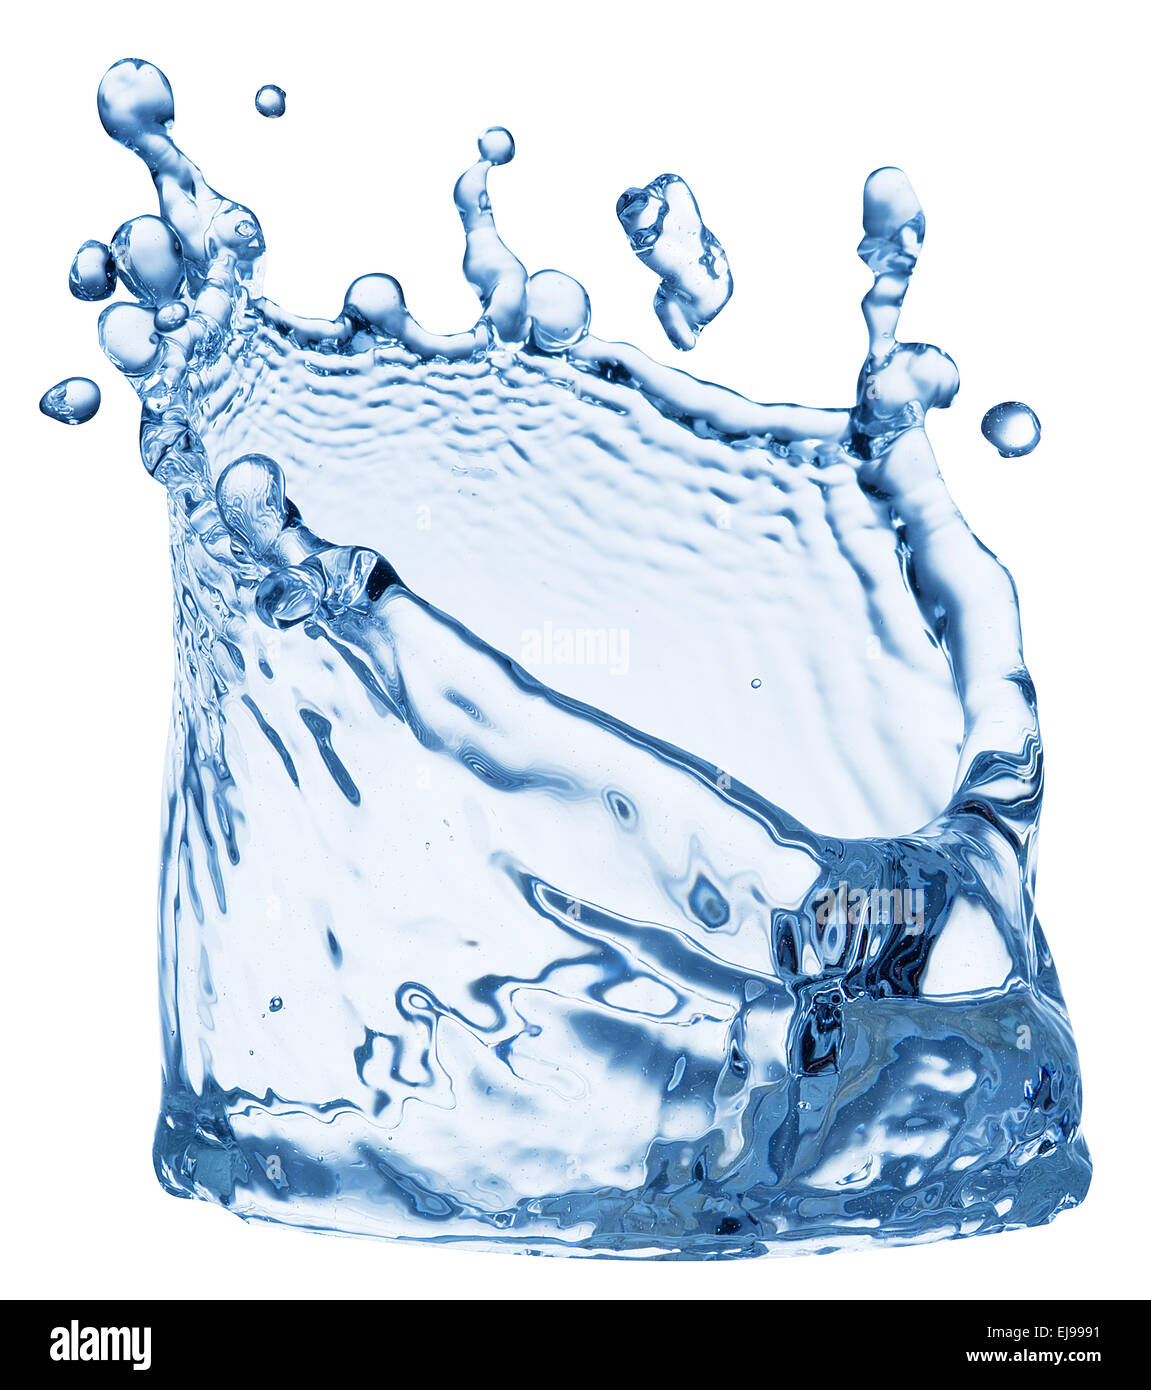 Splash of water in the shape of crown. File contains clipping paths. Stock Photo